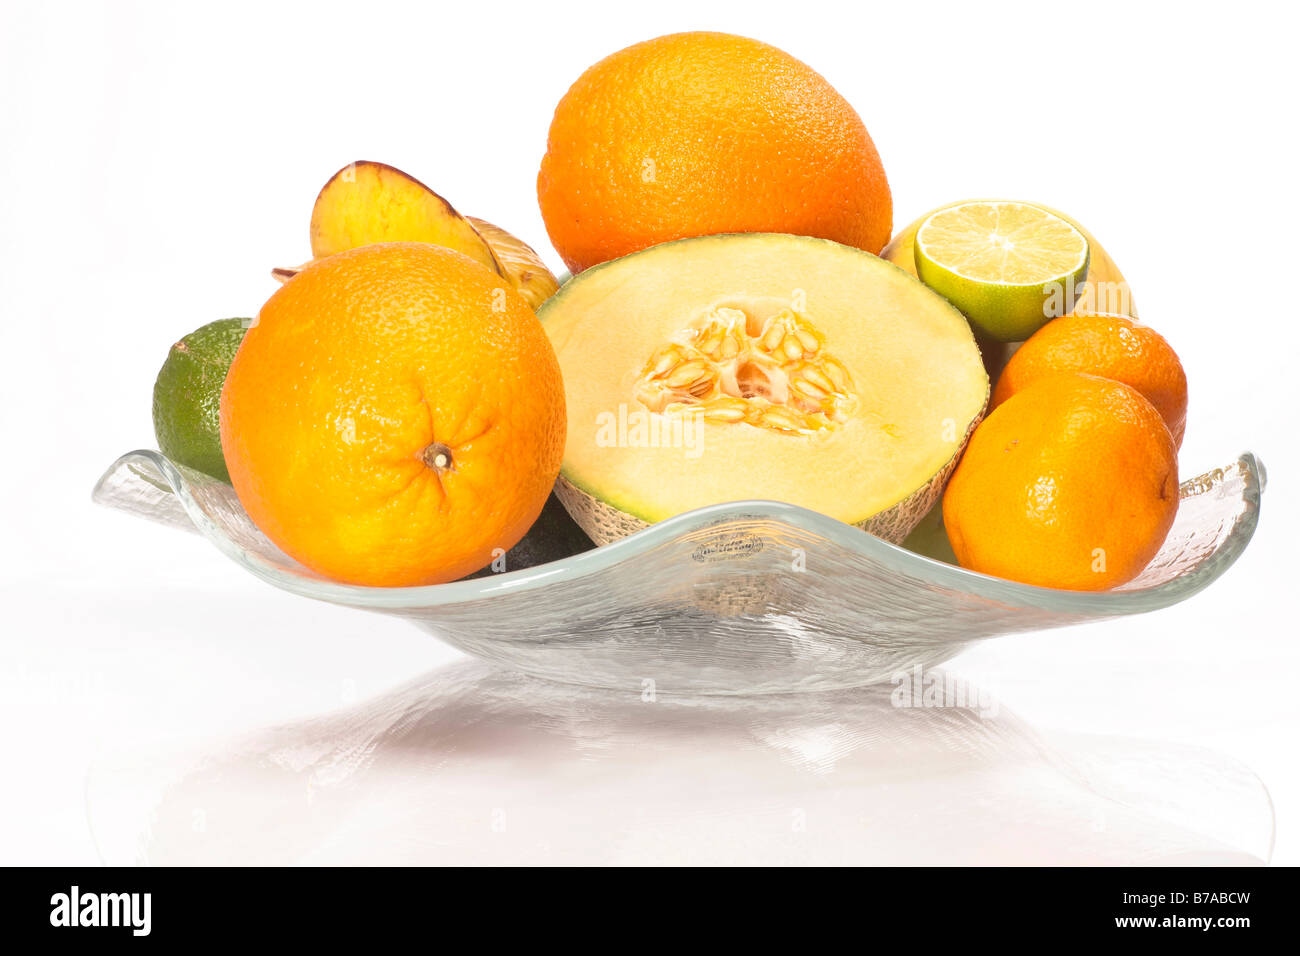 Sliced honeydew melon, oranges, mandarins, limes and star fruit in a glass bowl Stock Photo